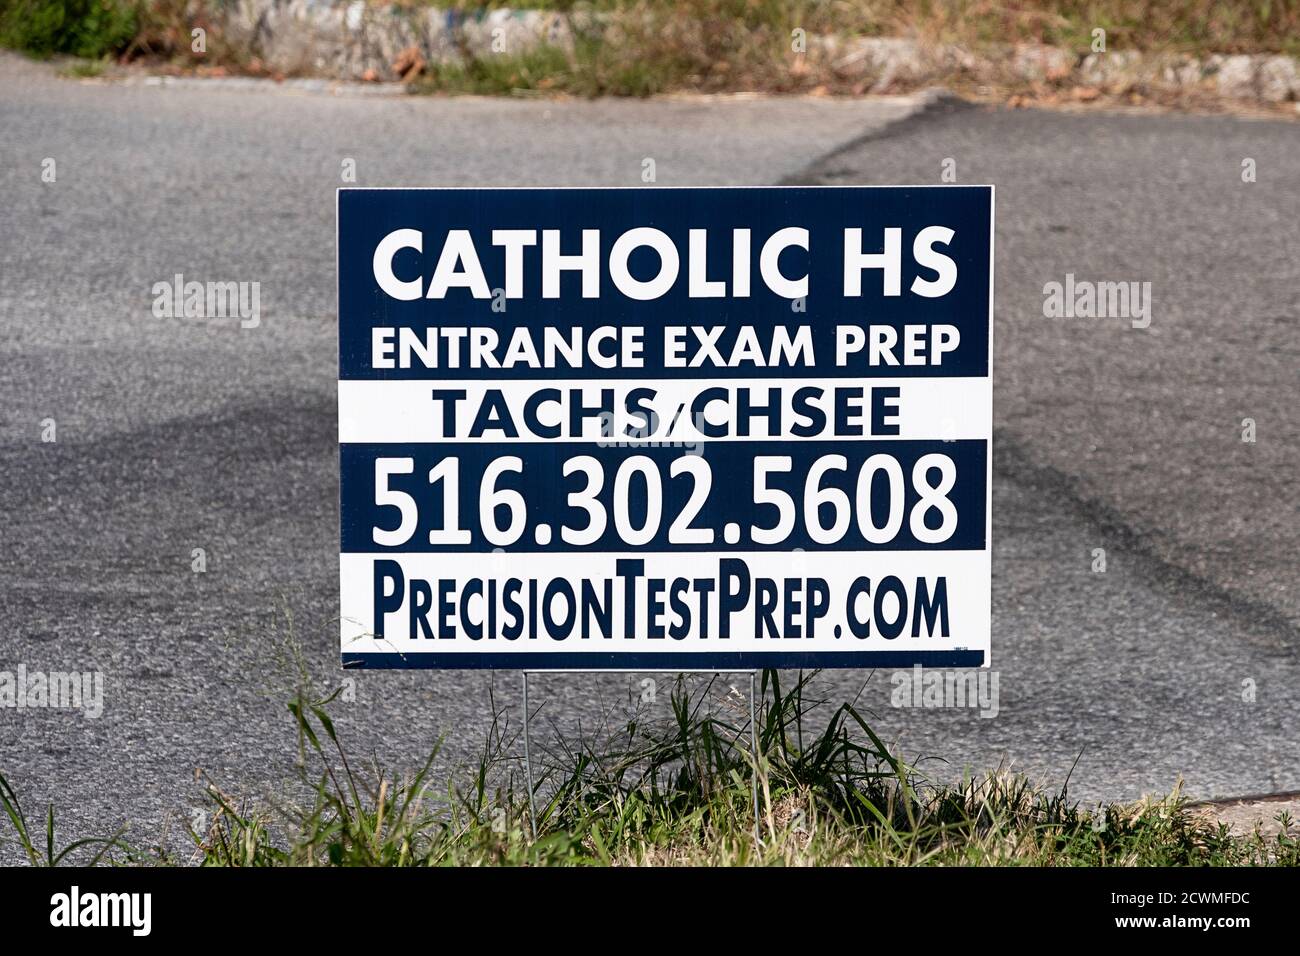 A sign offering a service that prepares students for entrance exams to Catholic high schools. In Whitestone, Queens, New York. Stock Photo